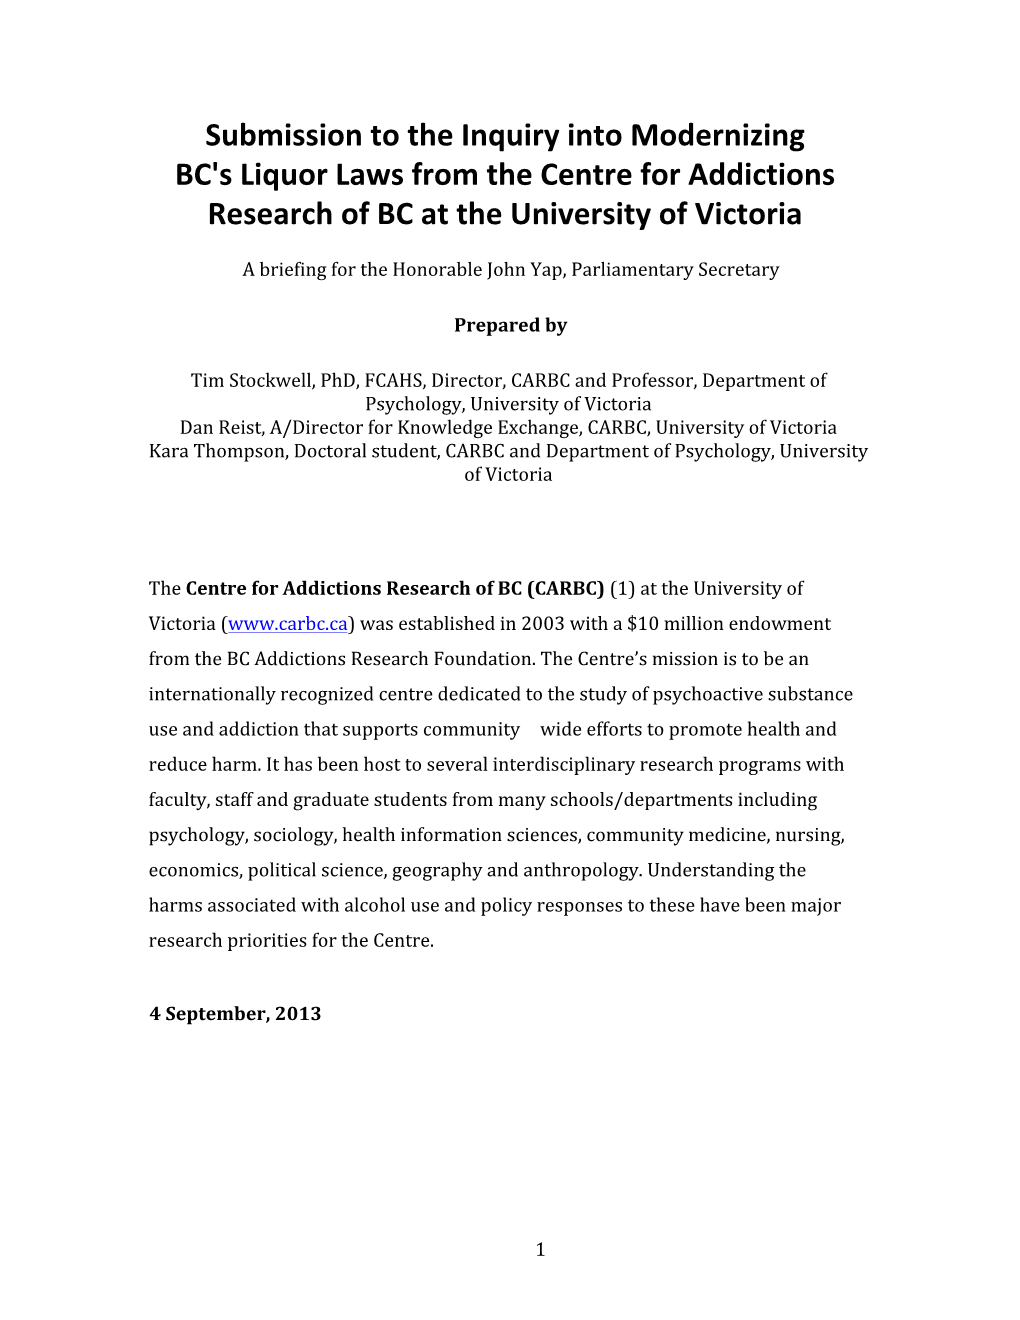 Submission to the Inquiry Into Modernizing BC's Liquor Laws from the Centre for Addictions Research of BC at the University of Victoria